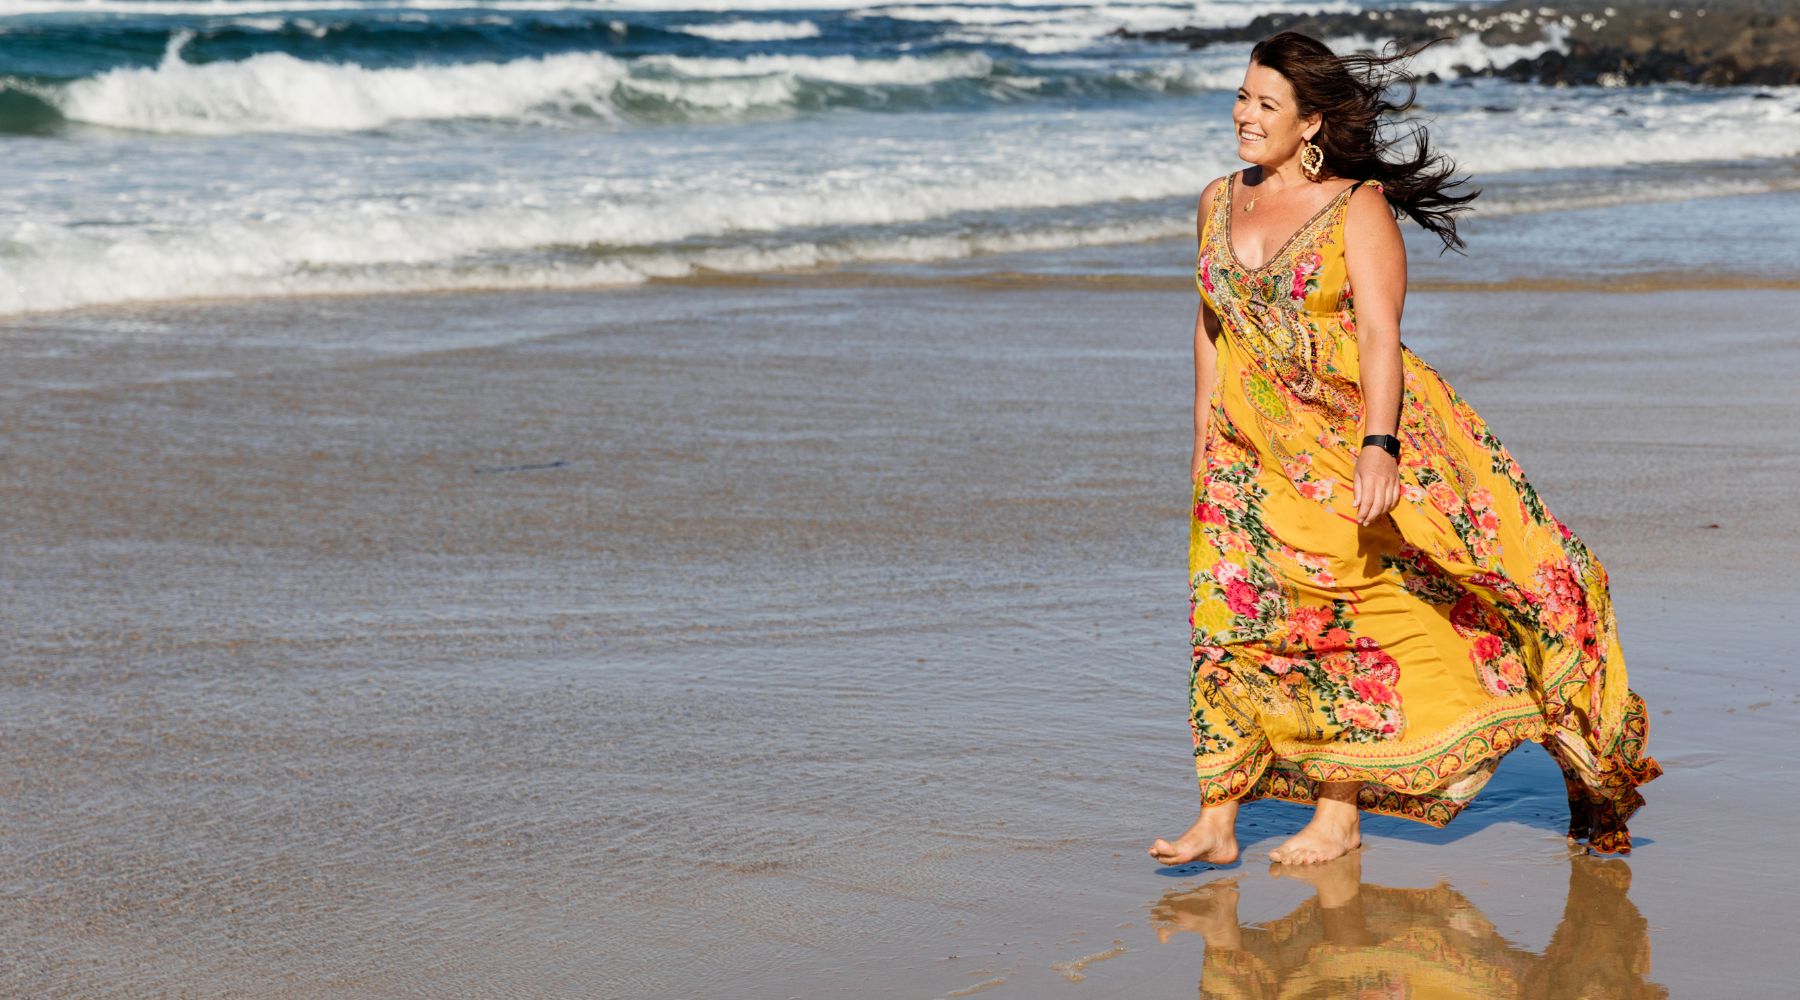 Woman walking on the beach with yellow dress.